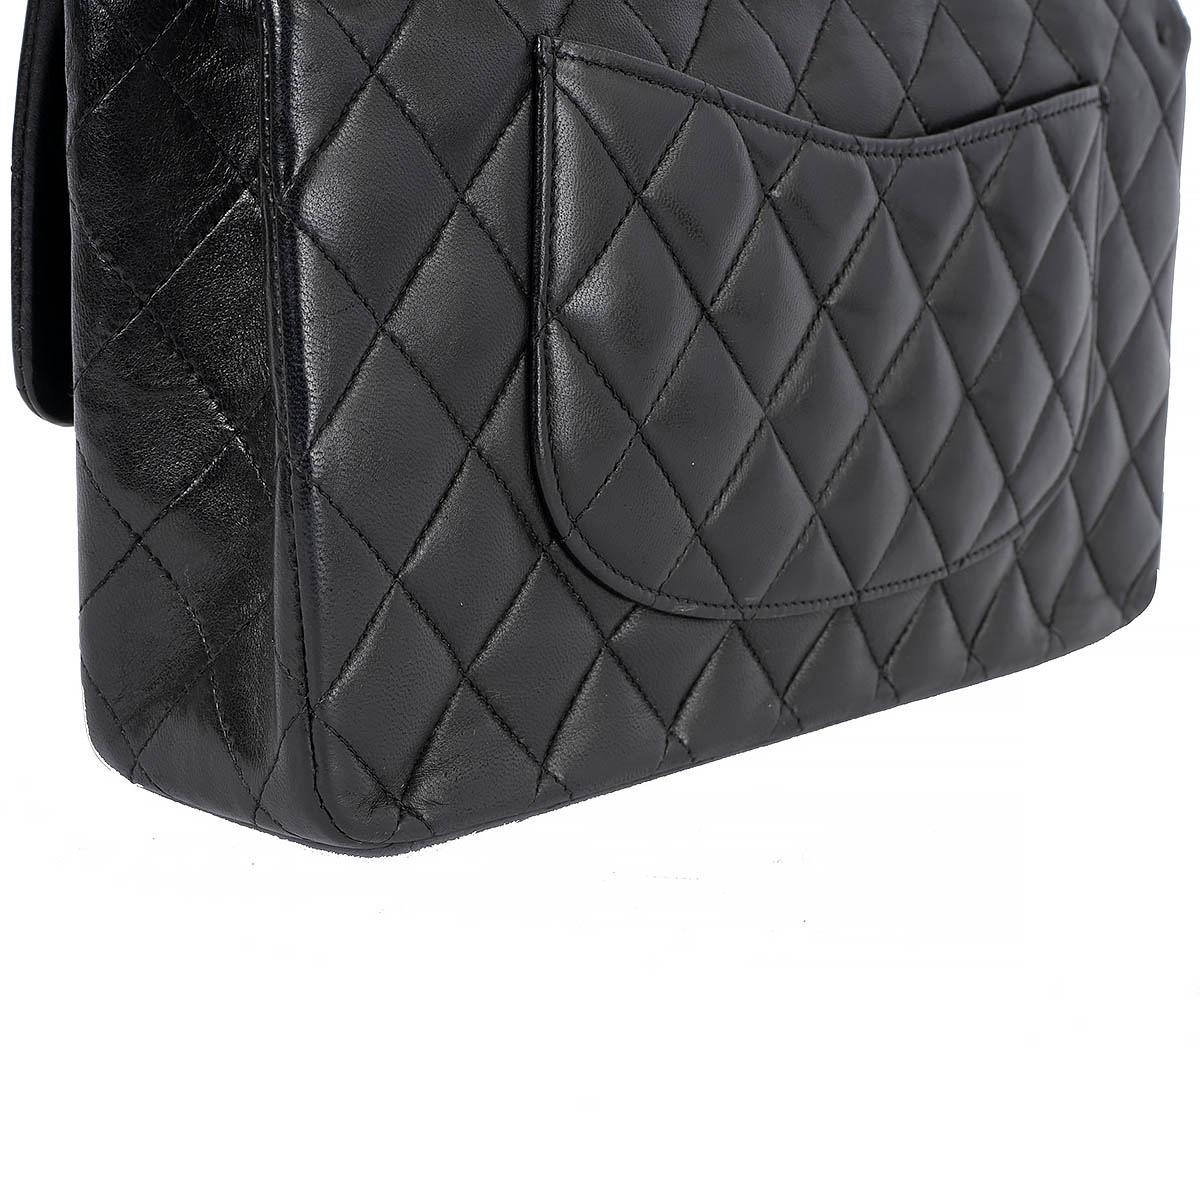 CHANEL black quilted lambskin leather CLASSIC MEDIUM TIMELESS Shoulder Bag 6